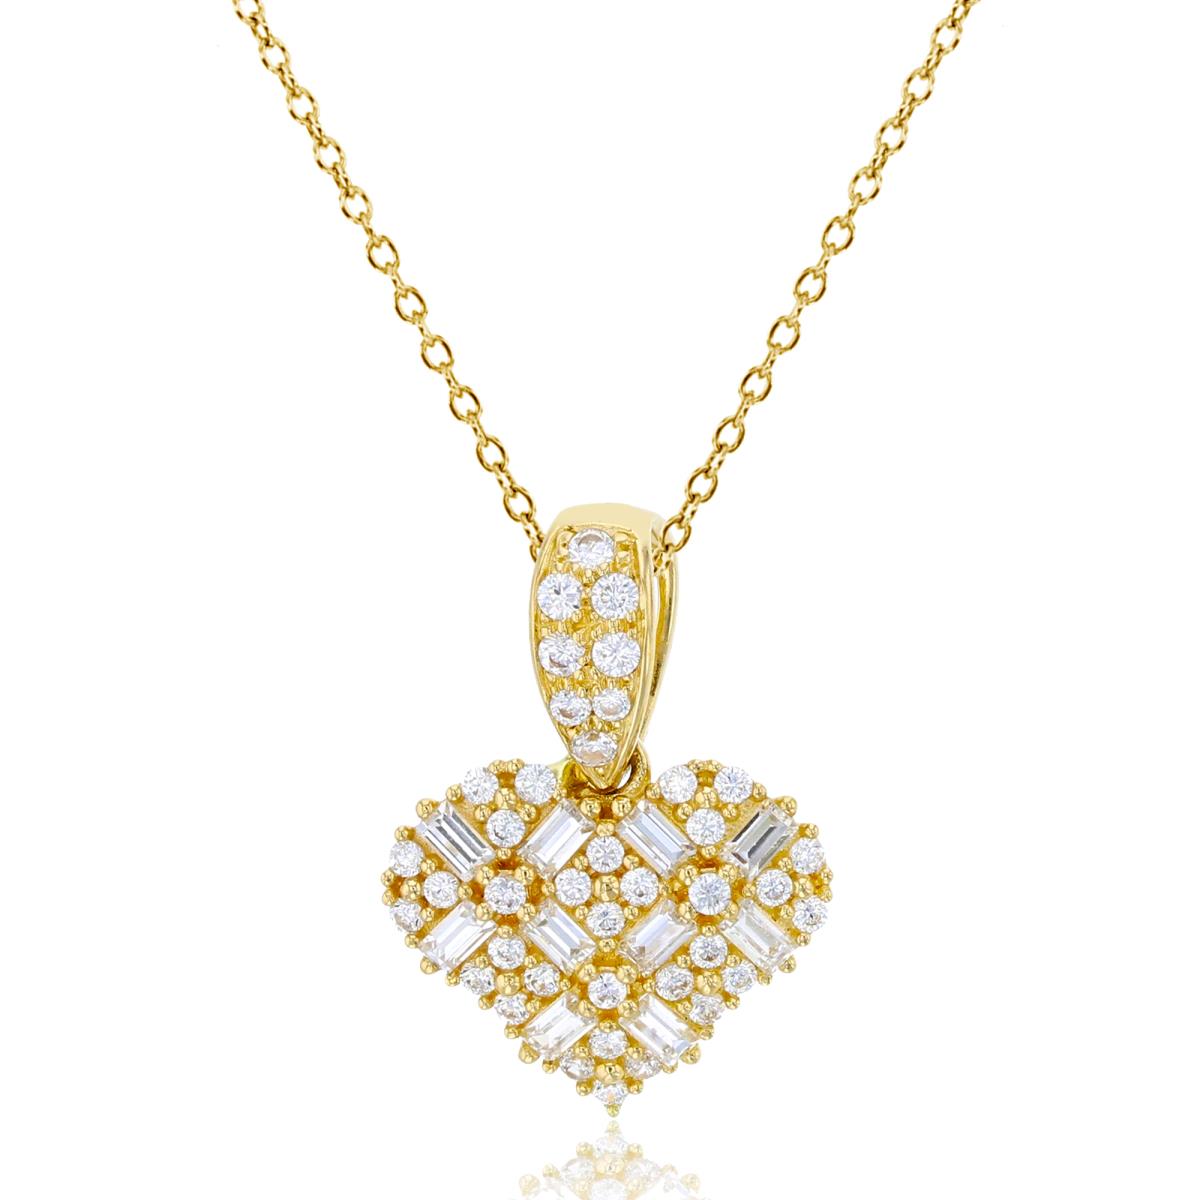 10K Yellow Gold Micropave Rd Cut & Baguette CZ "X" Heart 18" Necklace